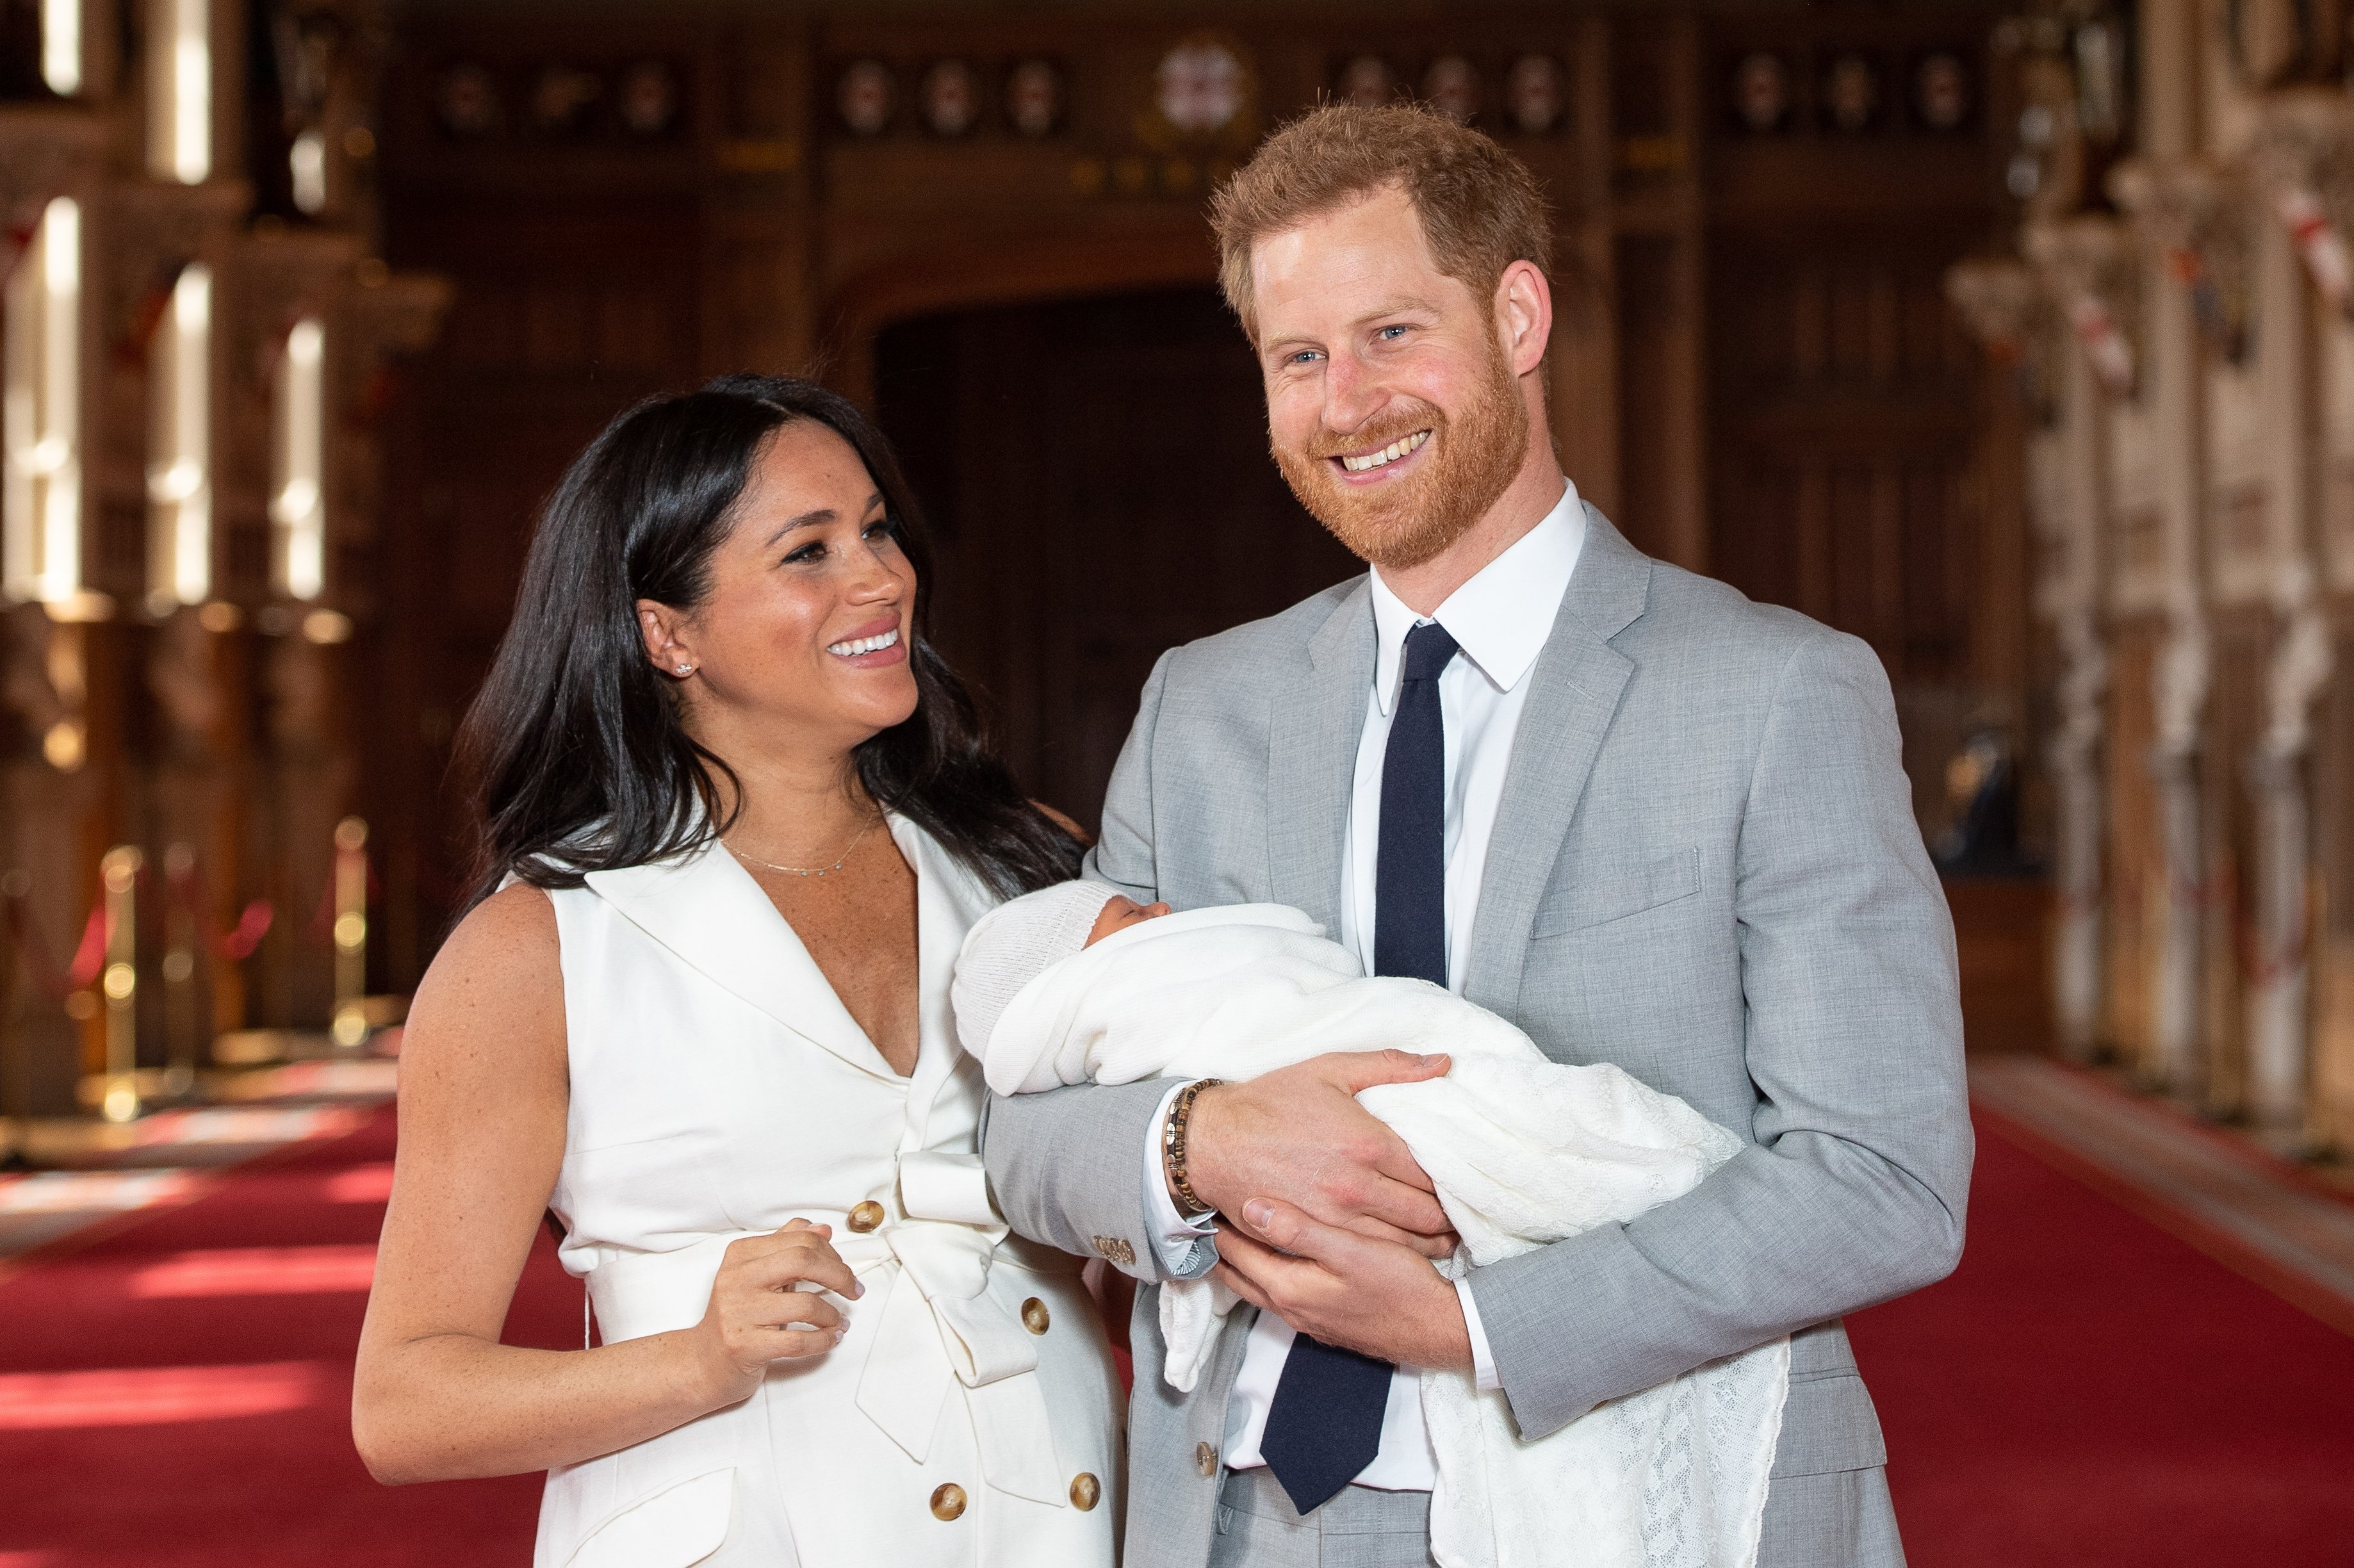 Prince Harry and Duchess Meghan pose with their newborn son Archie Harrison Mountbatten-Windsor during a photocall in St George's Hall at Windsor Castle on May 8, 2019 in Windsor, England | Photo: Getty Images